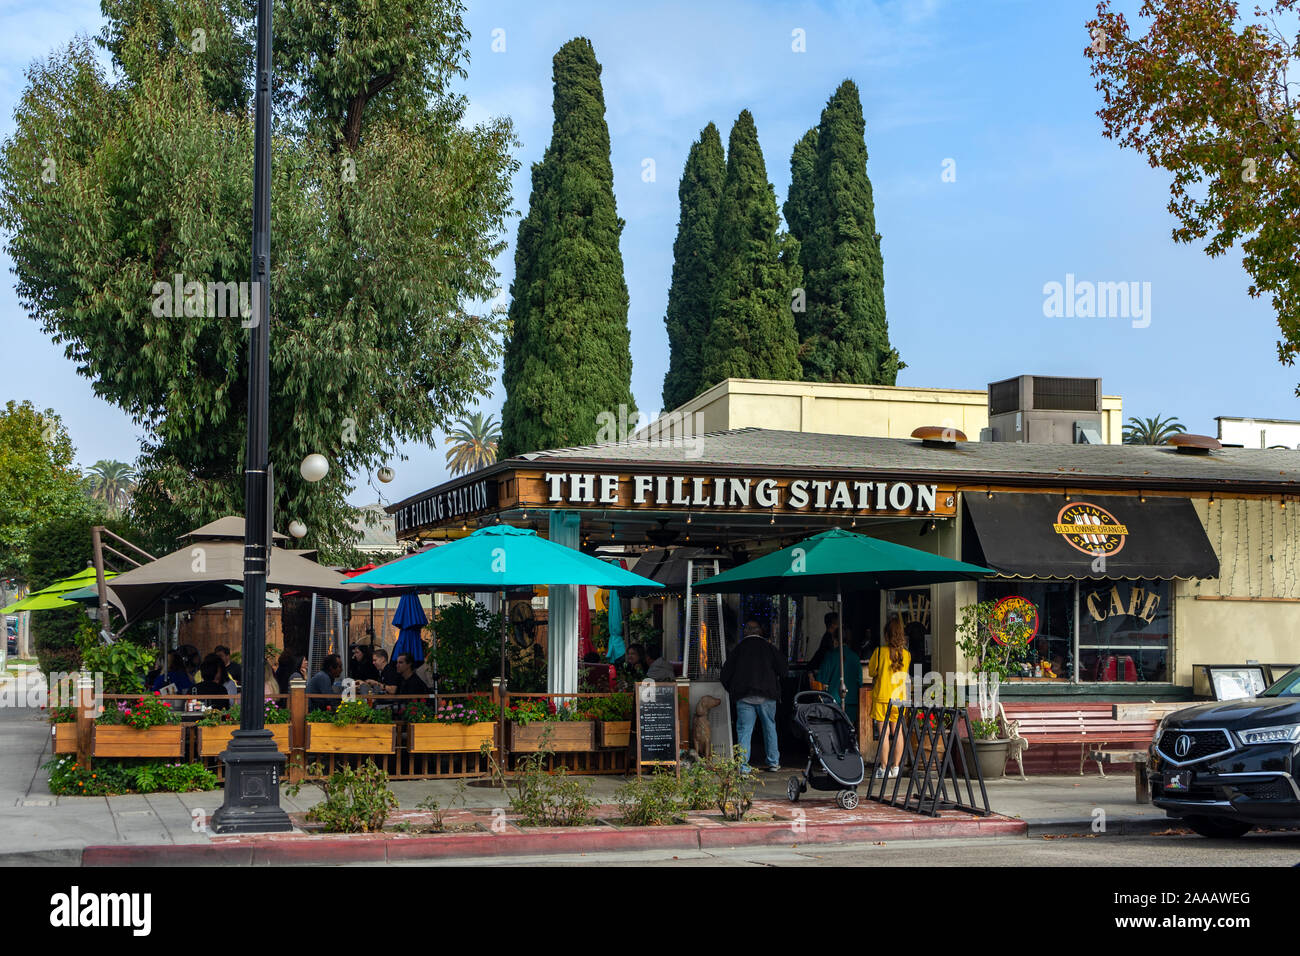 Orange, CA / USA - November 14, 2019: The Filling Station restaurant offers outdoor seating and is located in the old town area in The City of Orange, Stock Photo